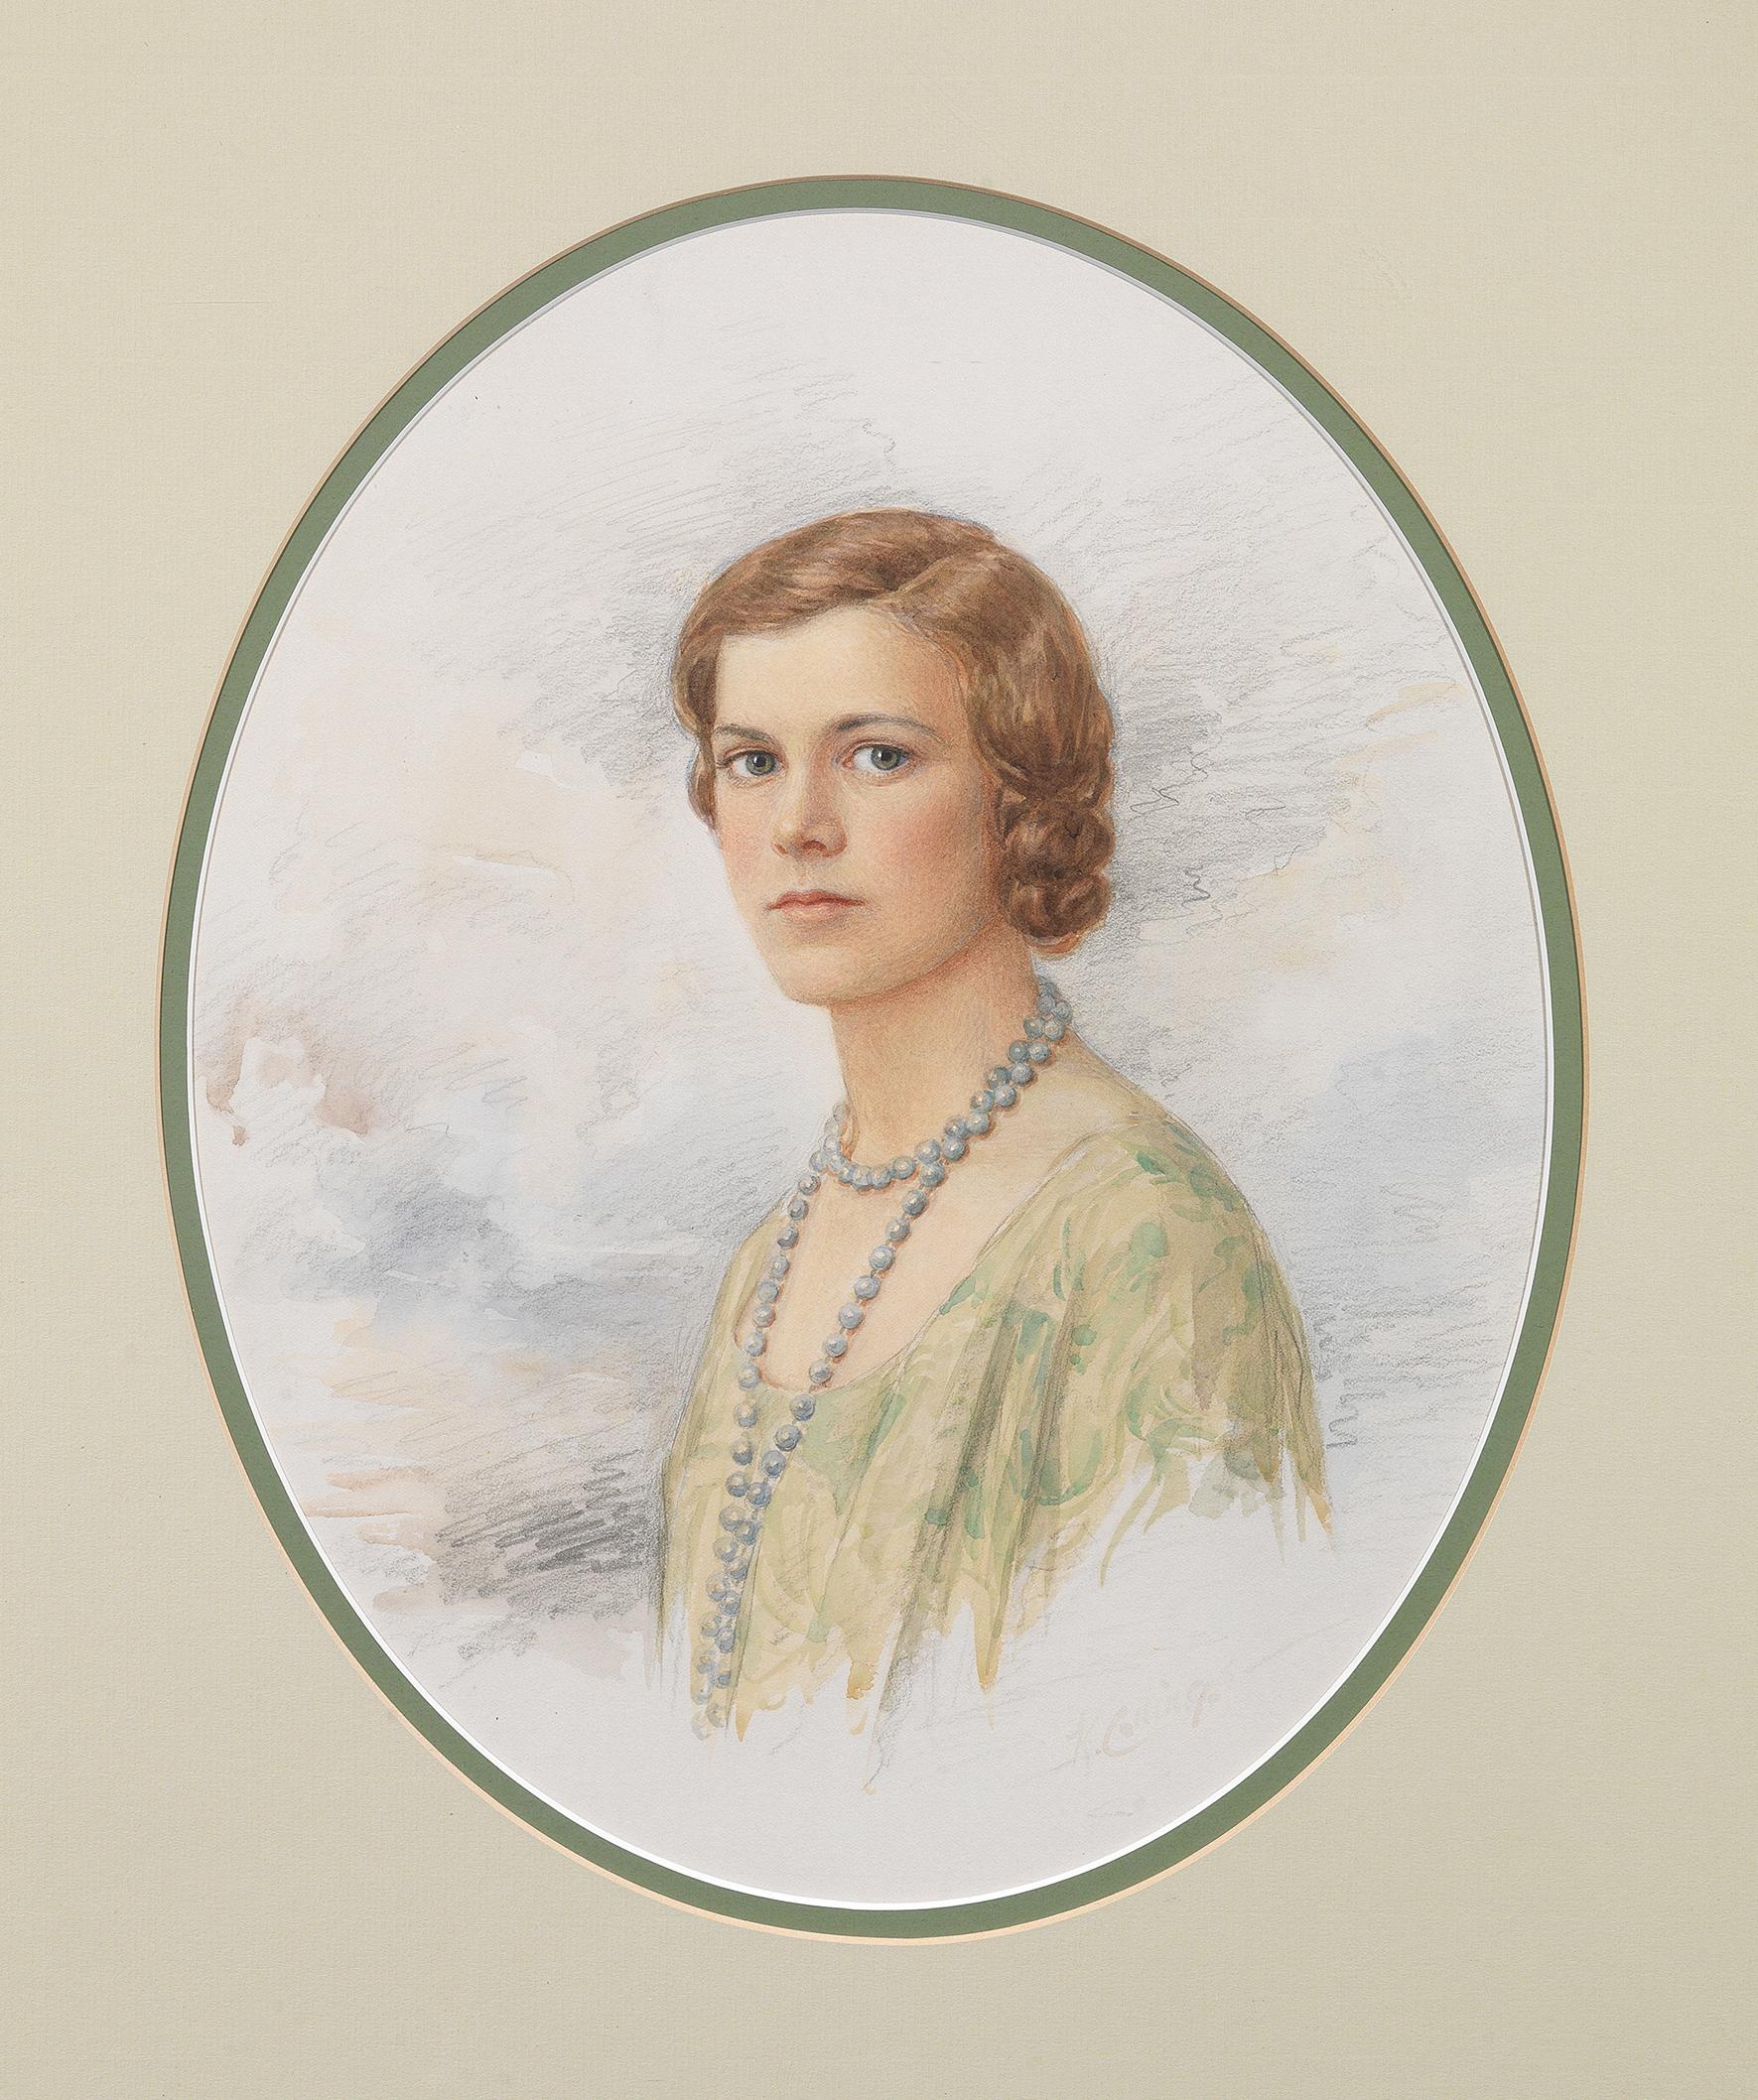 SHIPPING POLICY:
No additional costs will be added to this order.
Shipping costs will be totally covered by the seller (customs duties included). 

K. Collings, watercolor, portrait of a lady wearing beads, signed, in a gilt frame, 34cm x 27cm.